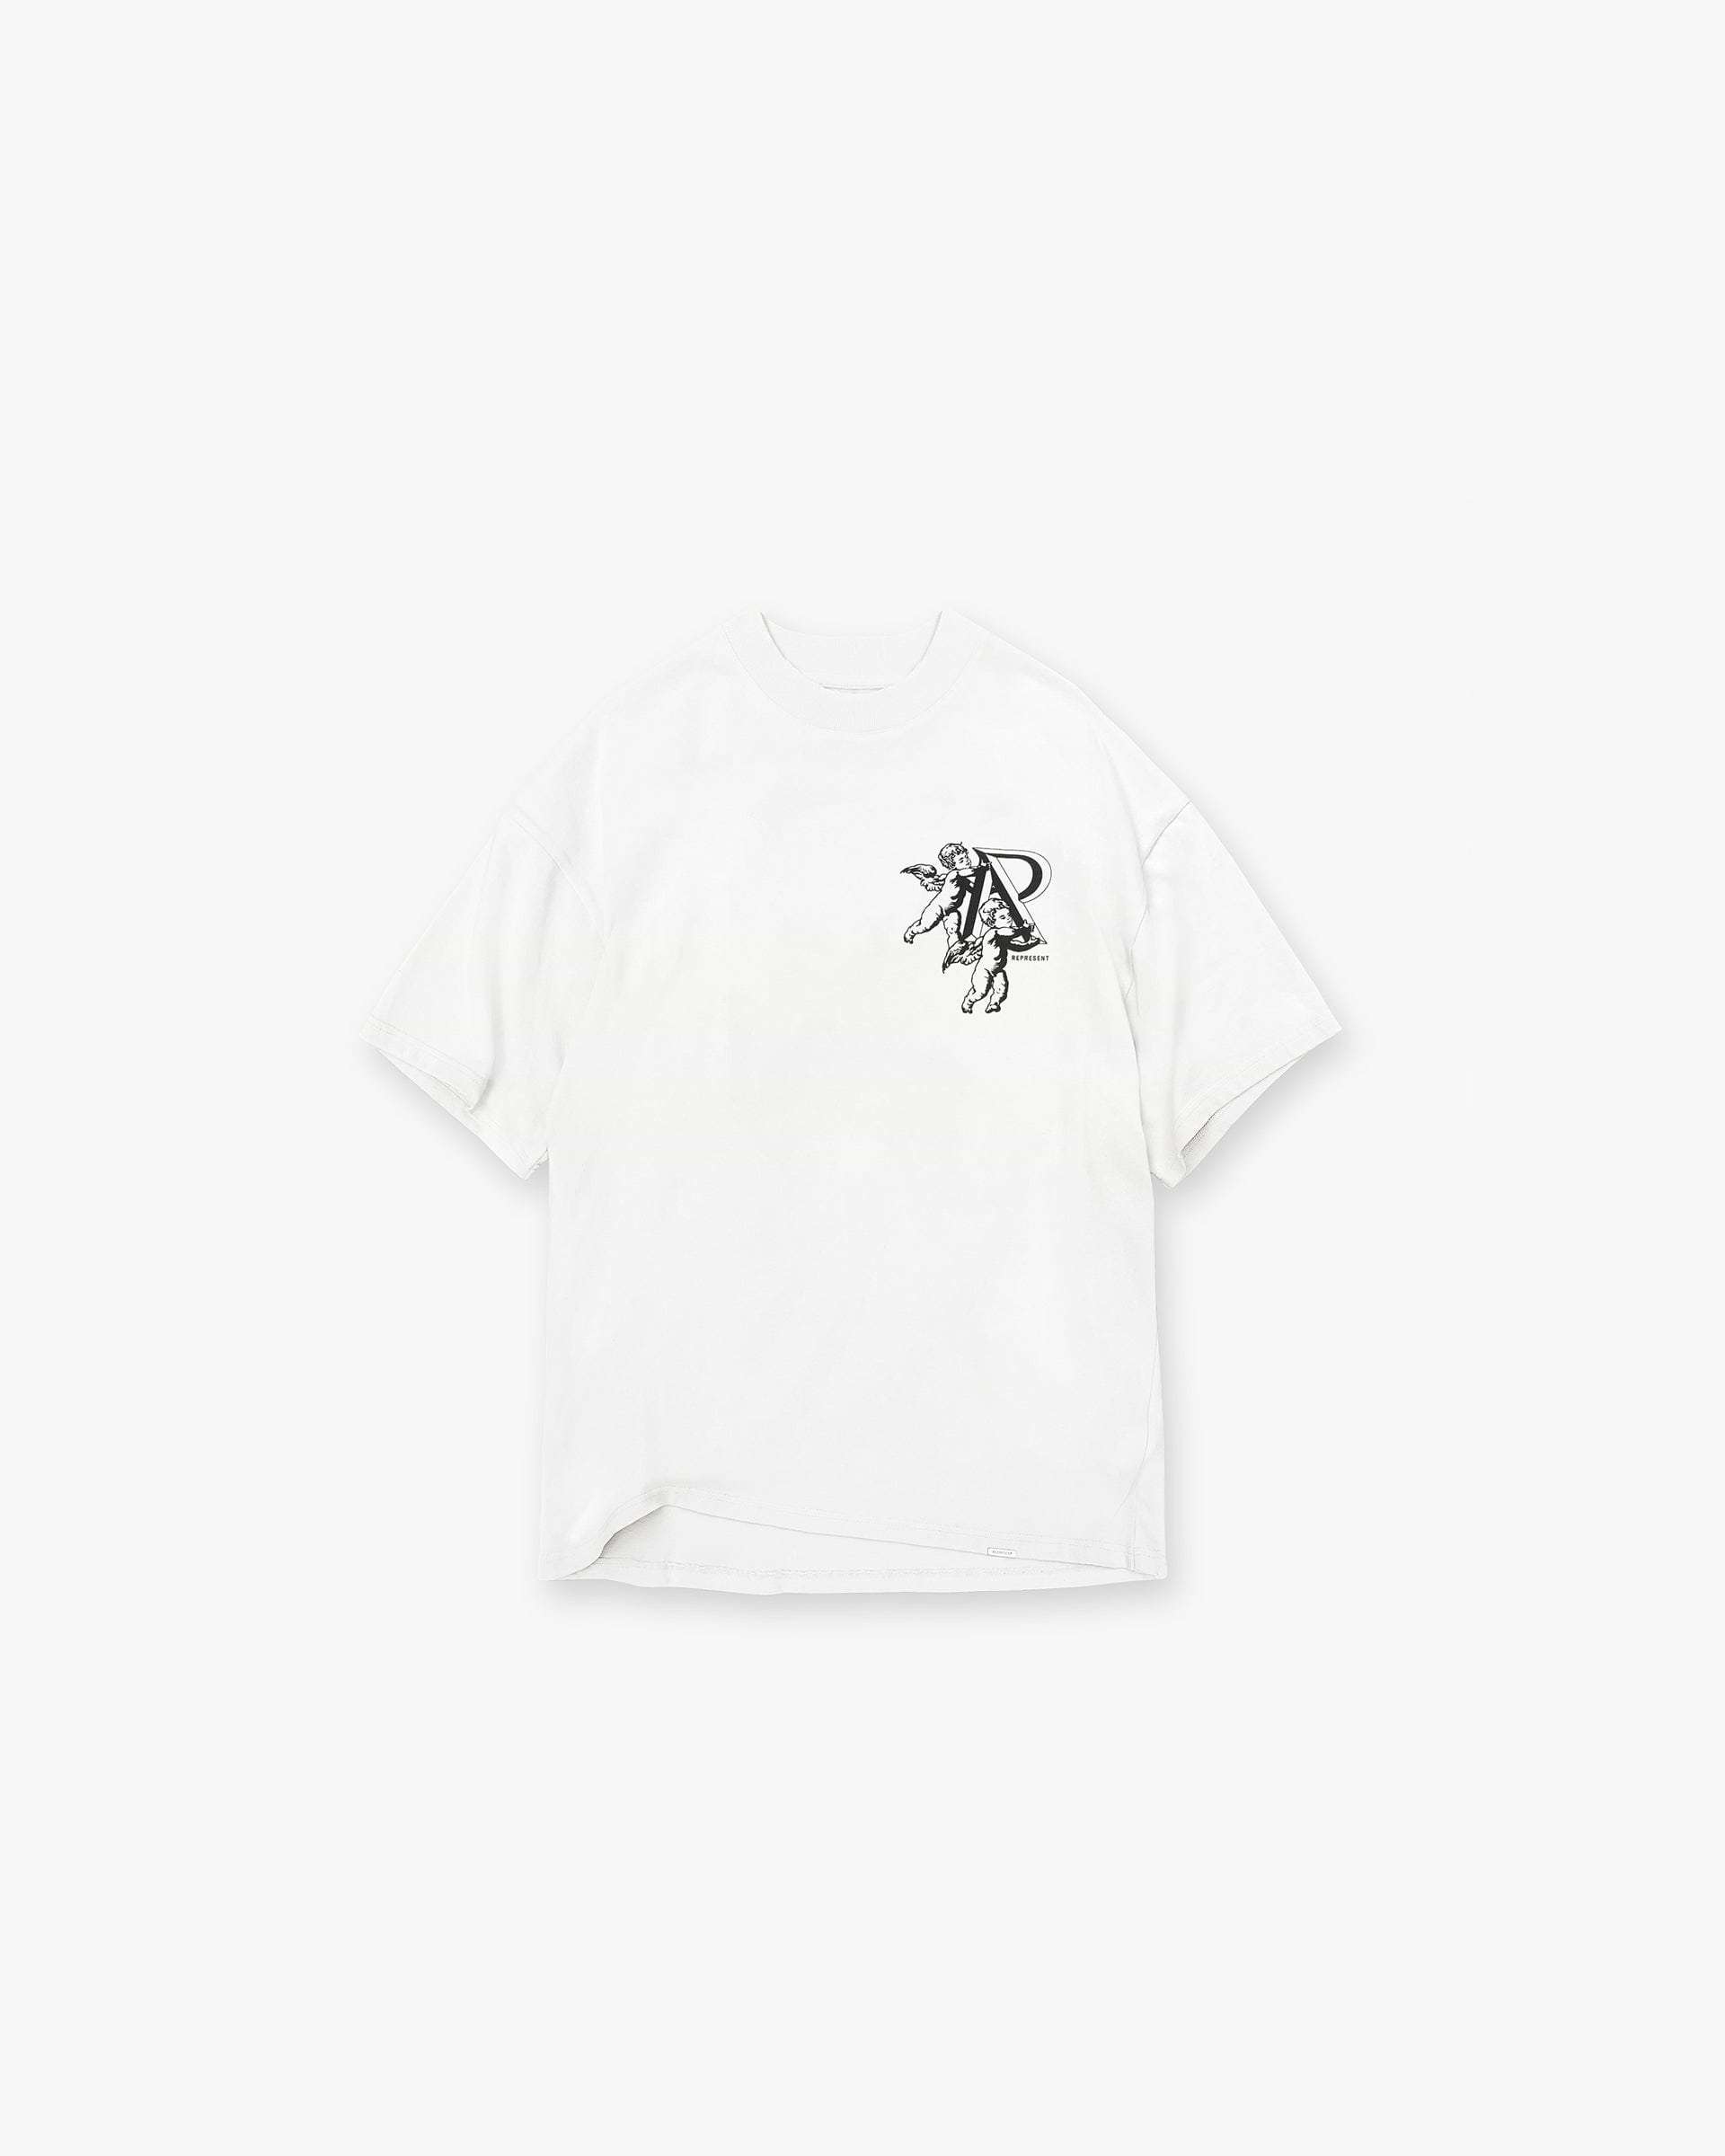 What are peoples thoughts on inside out T-shirts? : r/streetwear